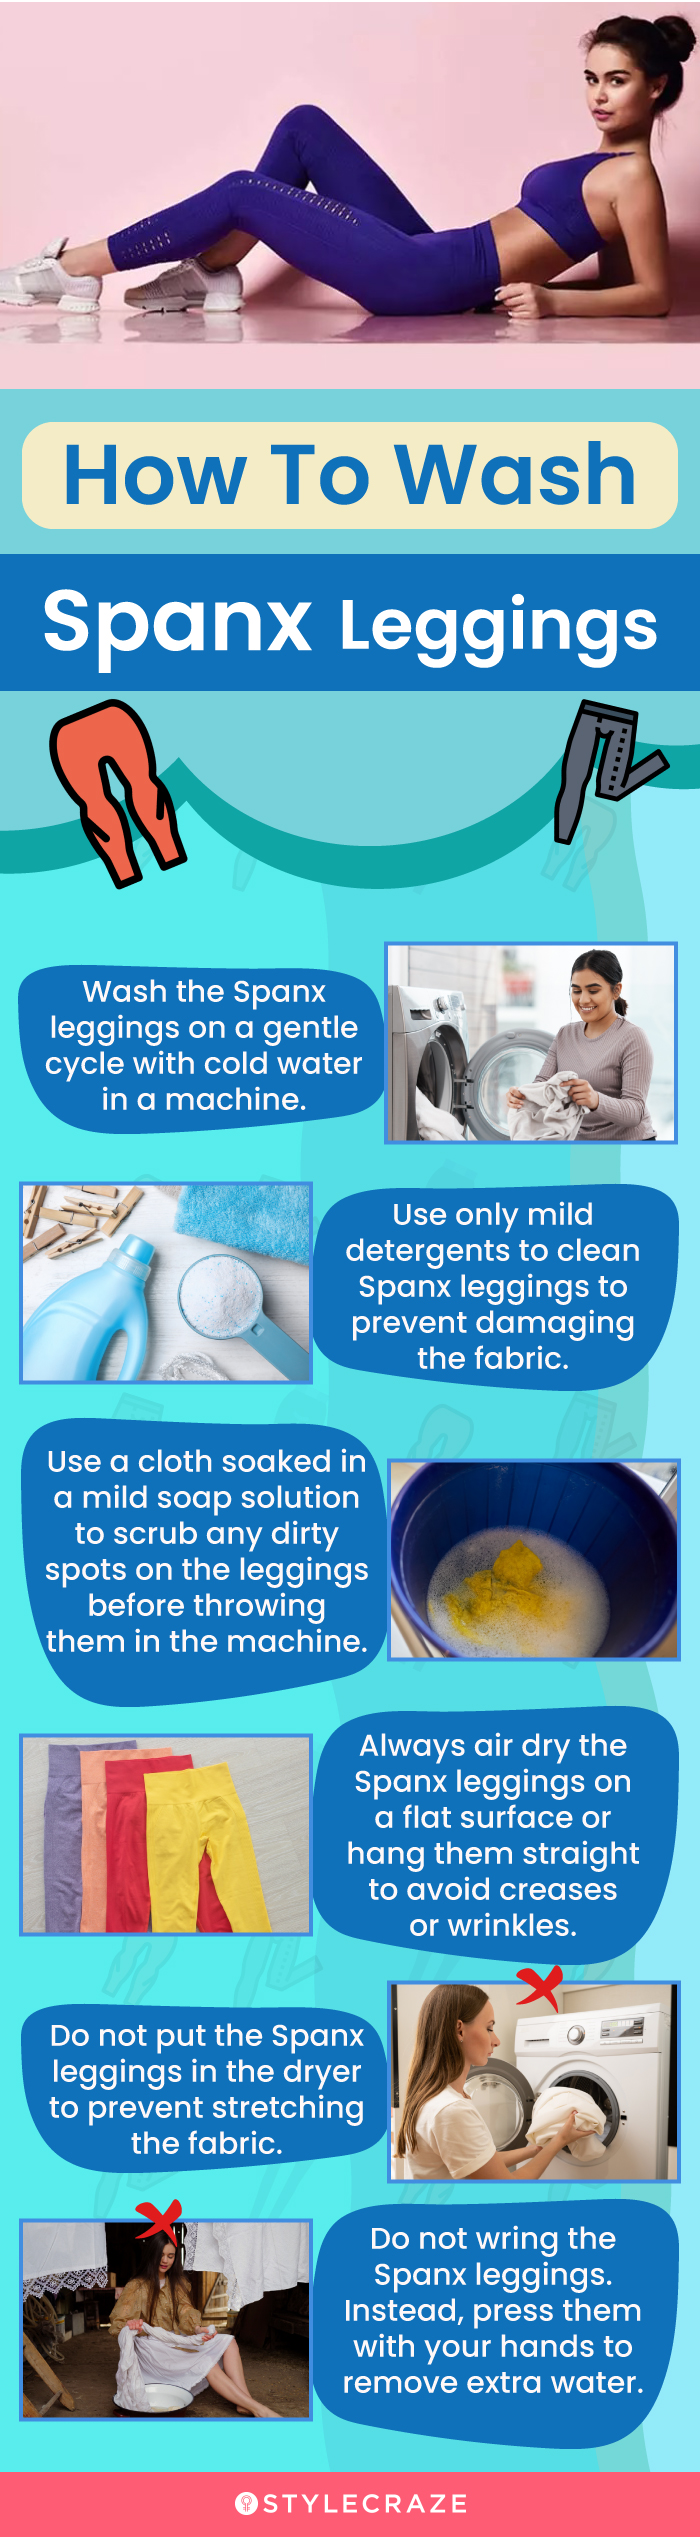 How To Wash Spanx Leggings (infographic)